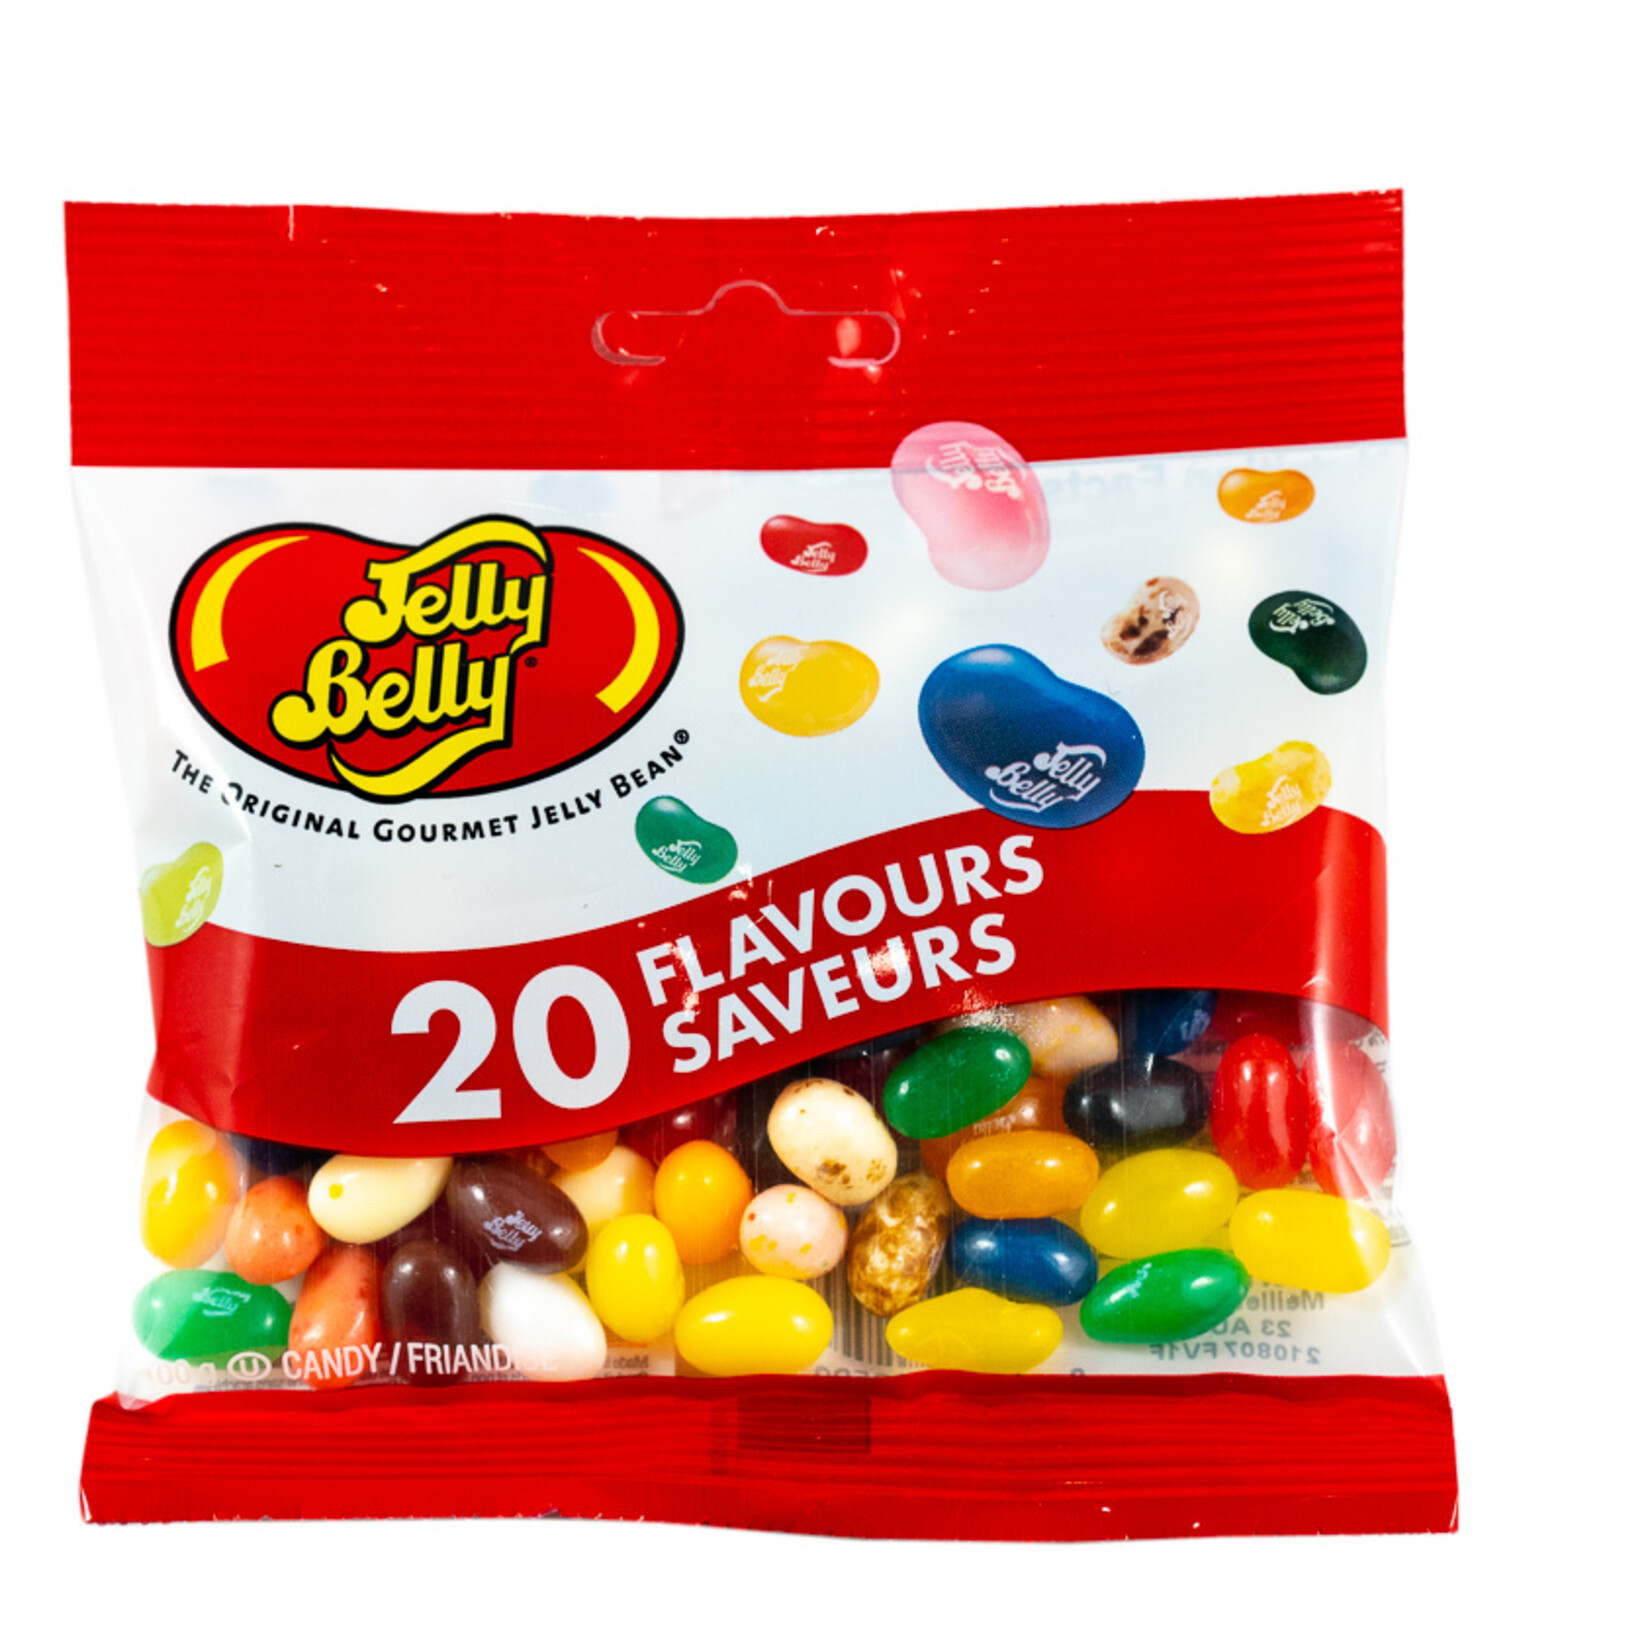 Jelly Belly Jelly Belly 20 saveurs 100g